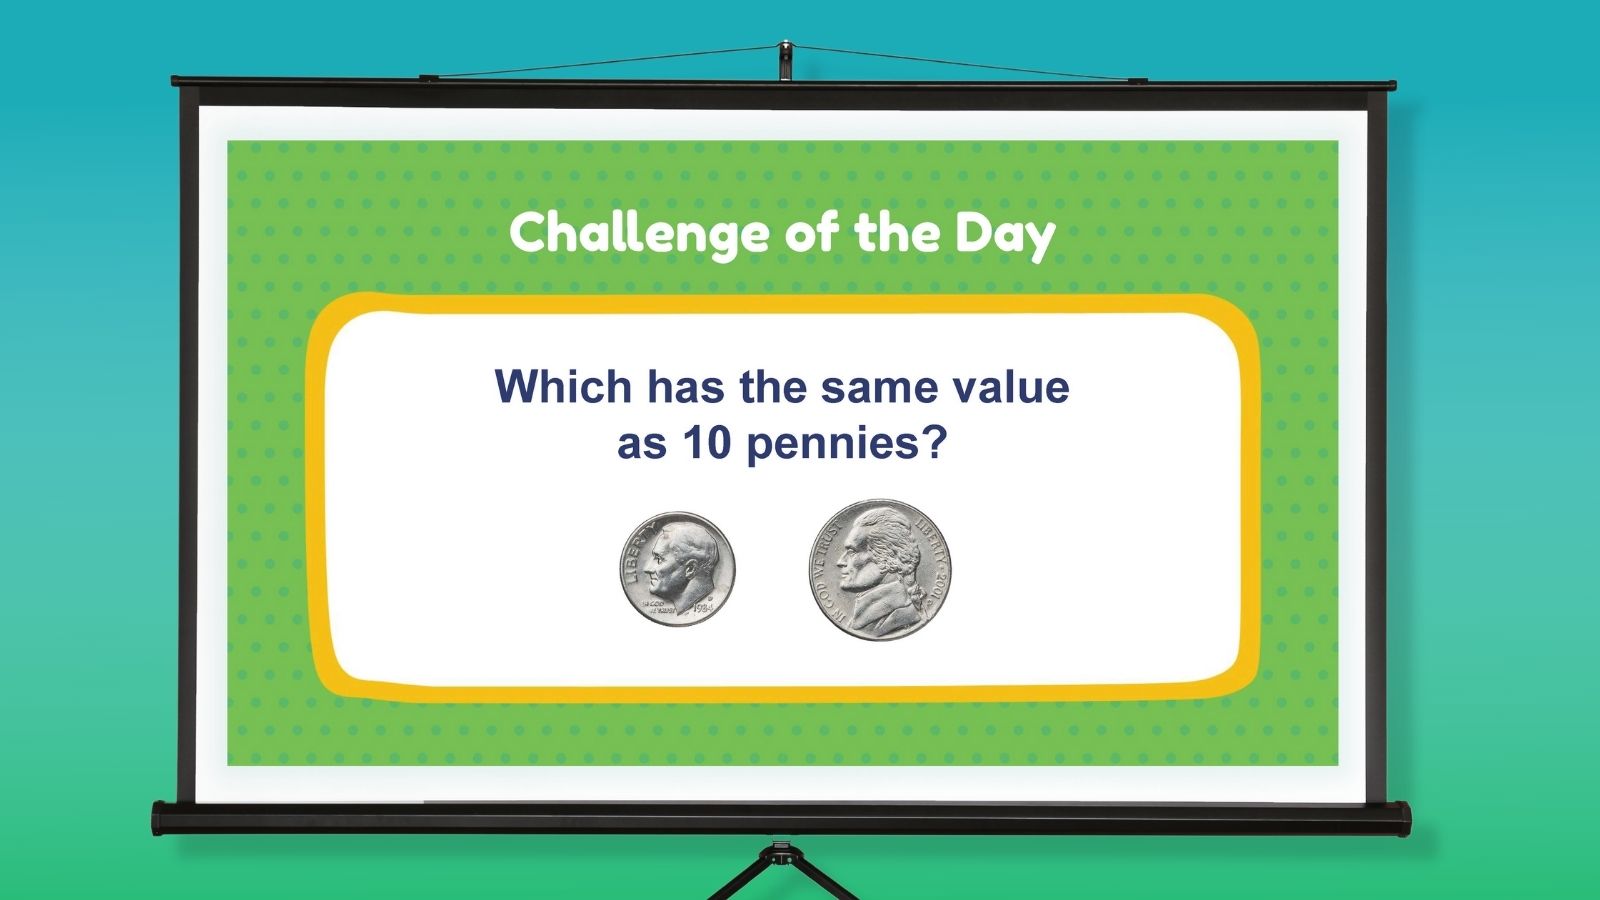 (opens in a new tab) Money word problem on a projector screen: 'Which has the same value as 10 pennies?' with a dime and a nickel